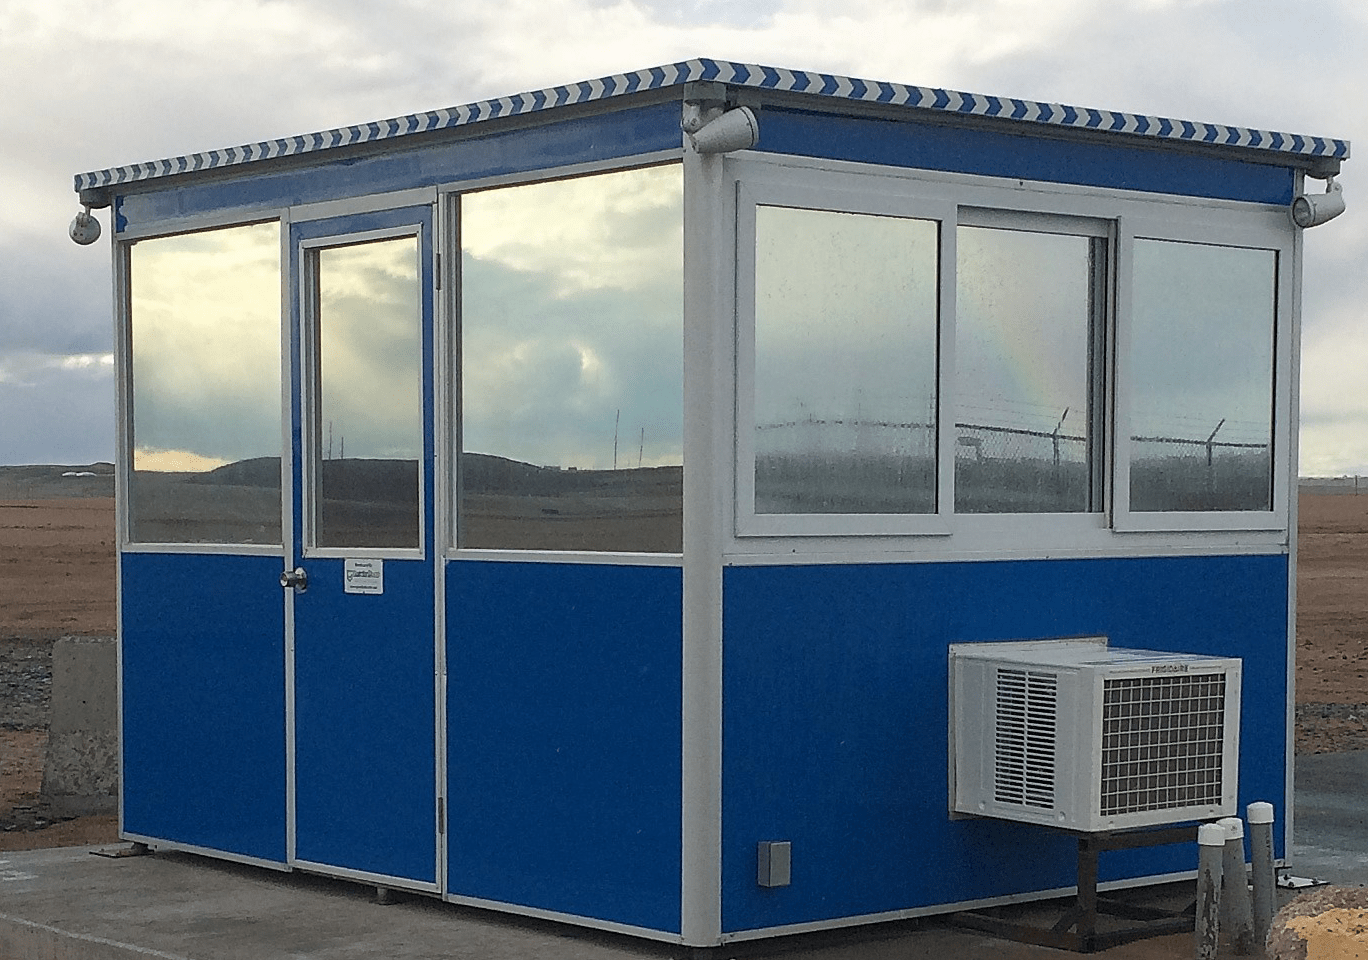 8x10 Security Guard Booth in Sandston, VA with Air Conditioner, Breaker Panel Box, and Ethernet Port and Phone Line